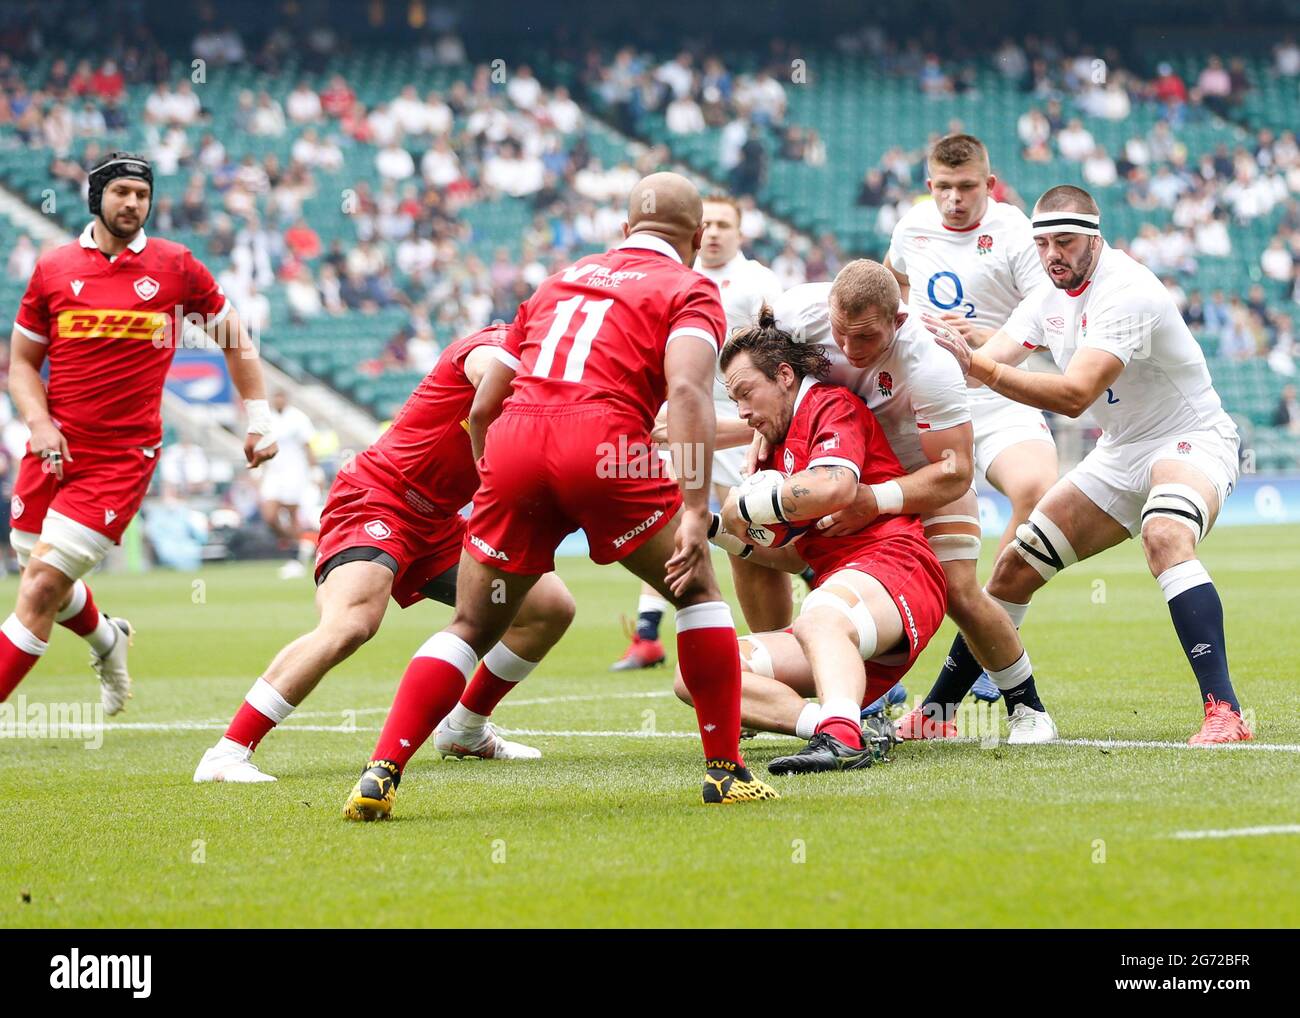 Twickenham, Londres, Royaume-Uni. 10 juillet 2021. International Rugby Union Angleterre contre le Canada; Sam Underhill of England Making a big thackle crédit: Action plus Sports/Alamy Live News Banque D'Images